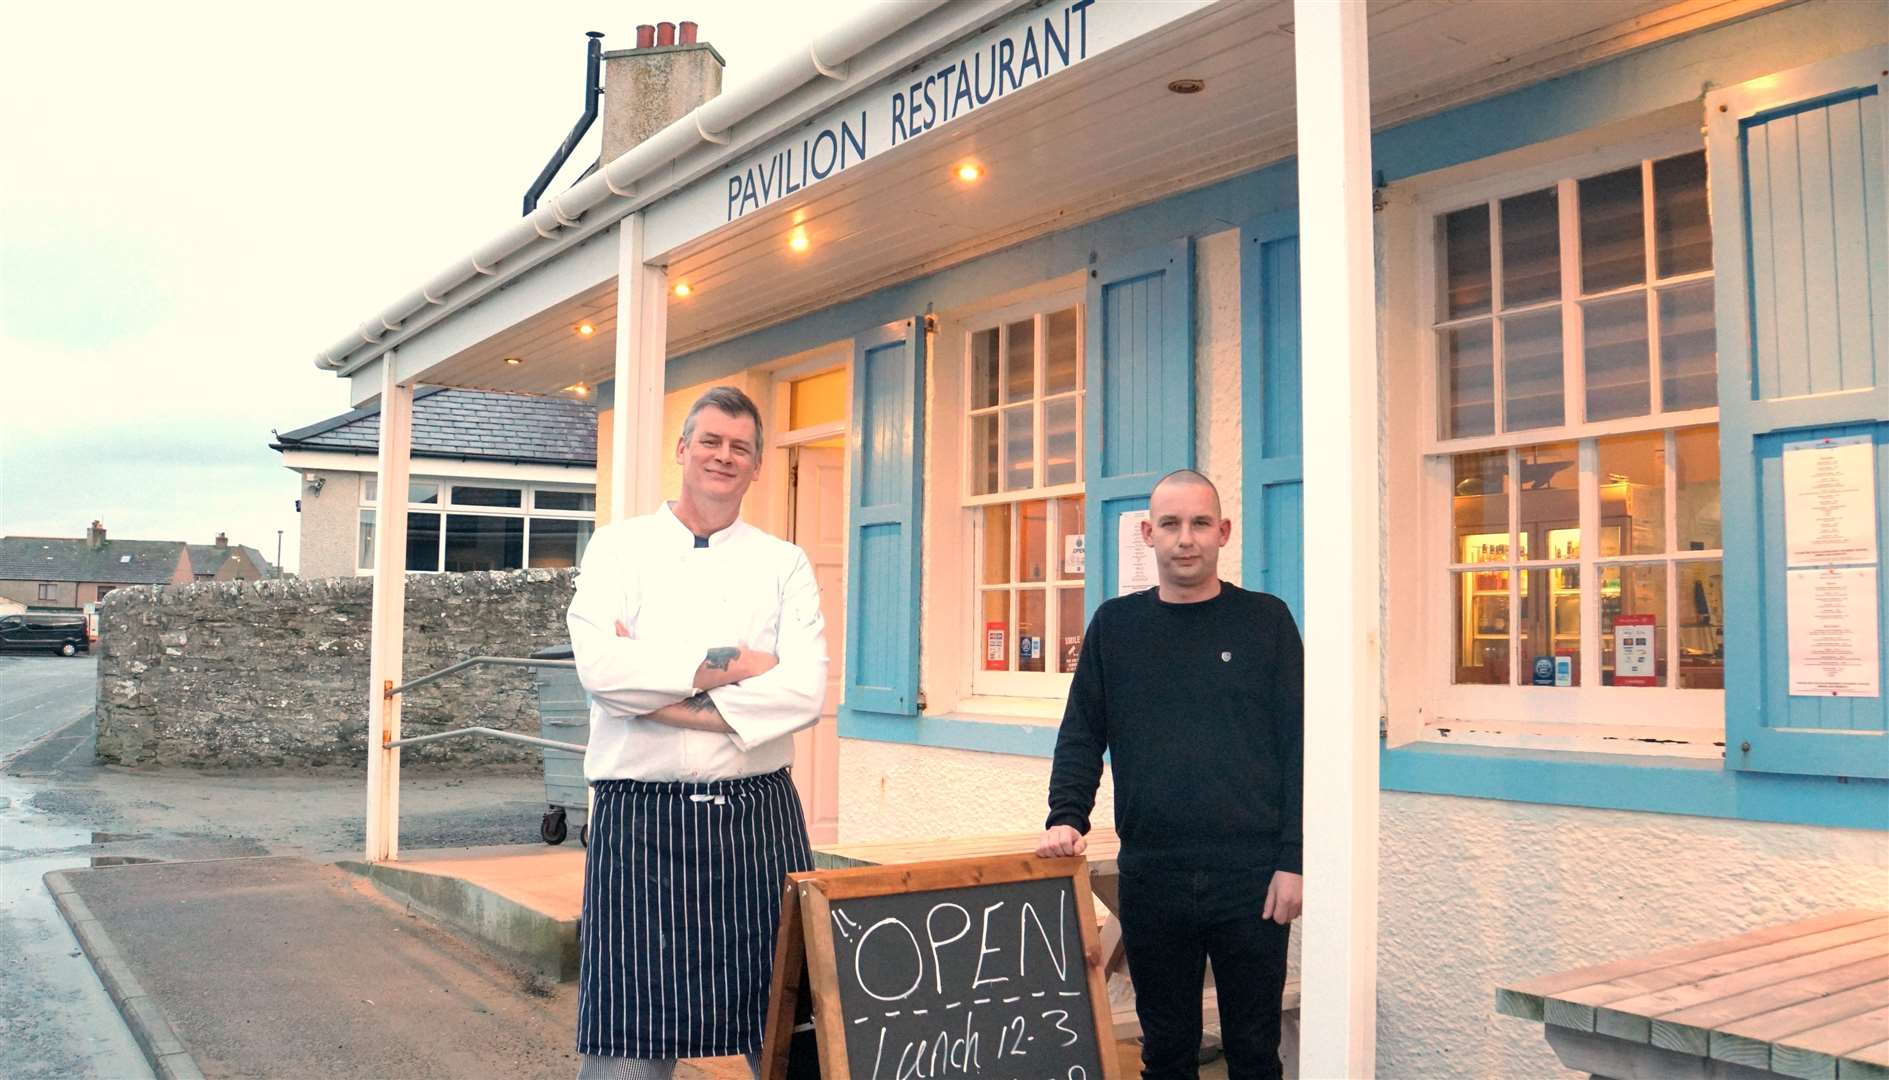 Stevie Dickson, left, with manager Eddie McGrory. Mr Dickson has recently taken over the Pavilion Restaurant and fears the sand could seriously damage his business.